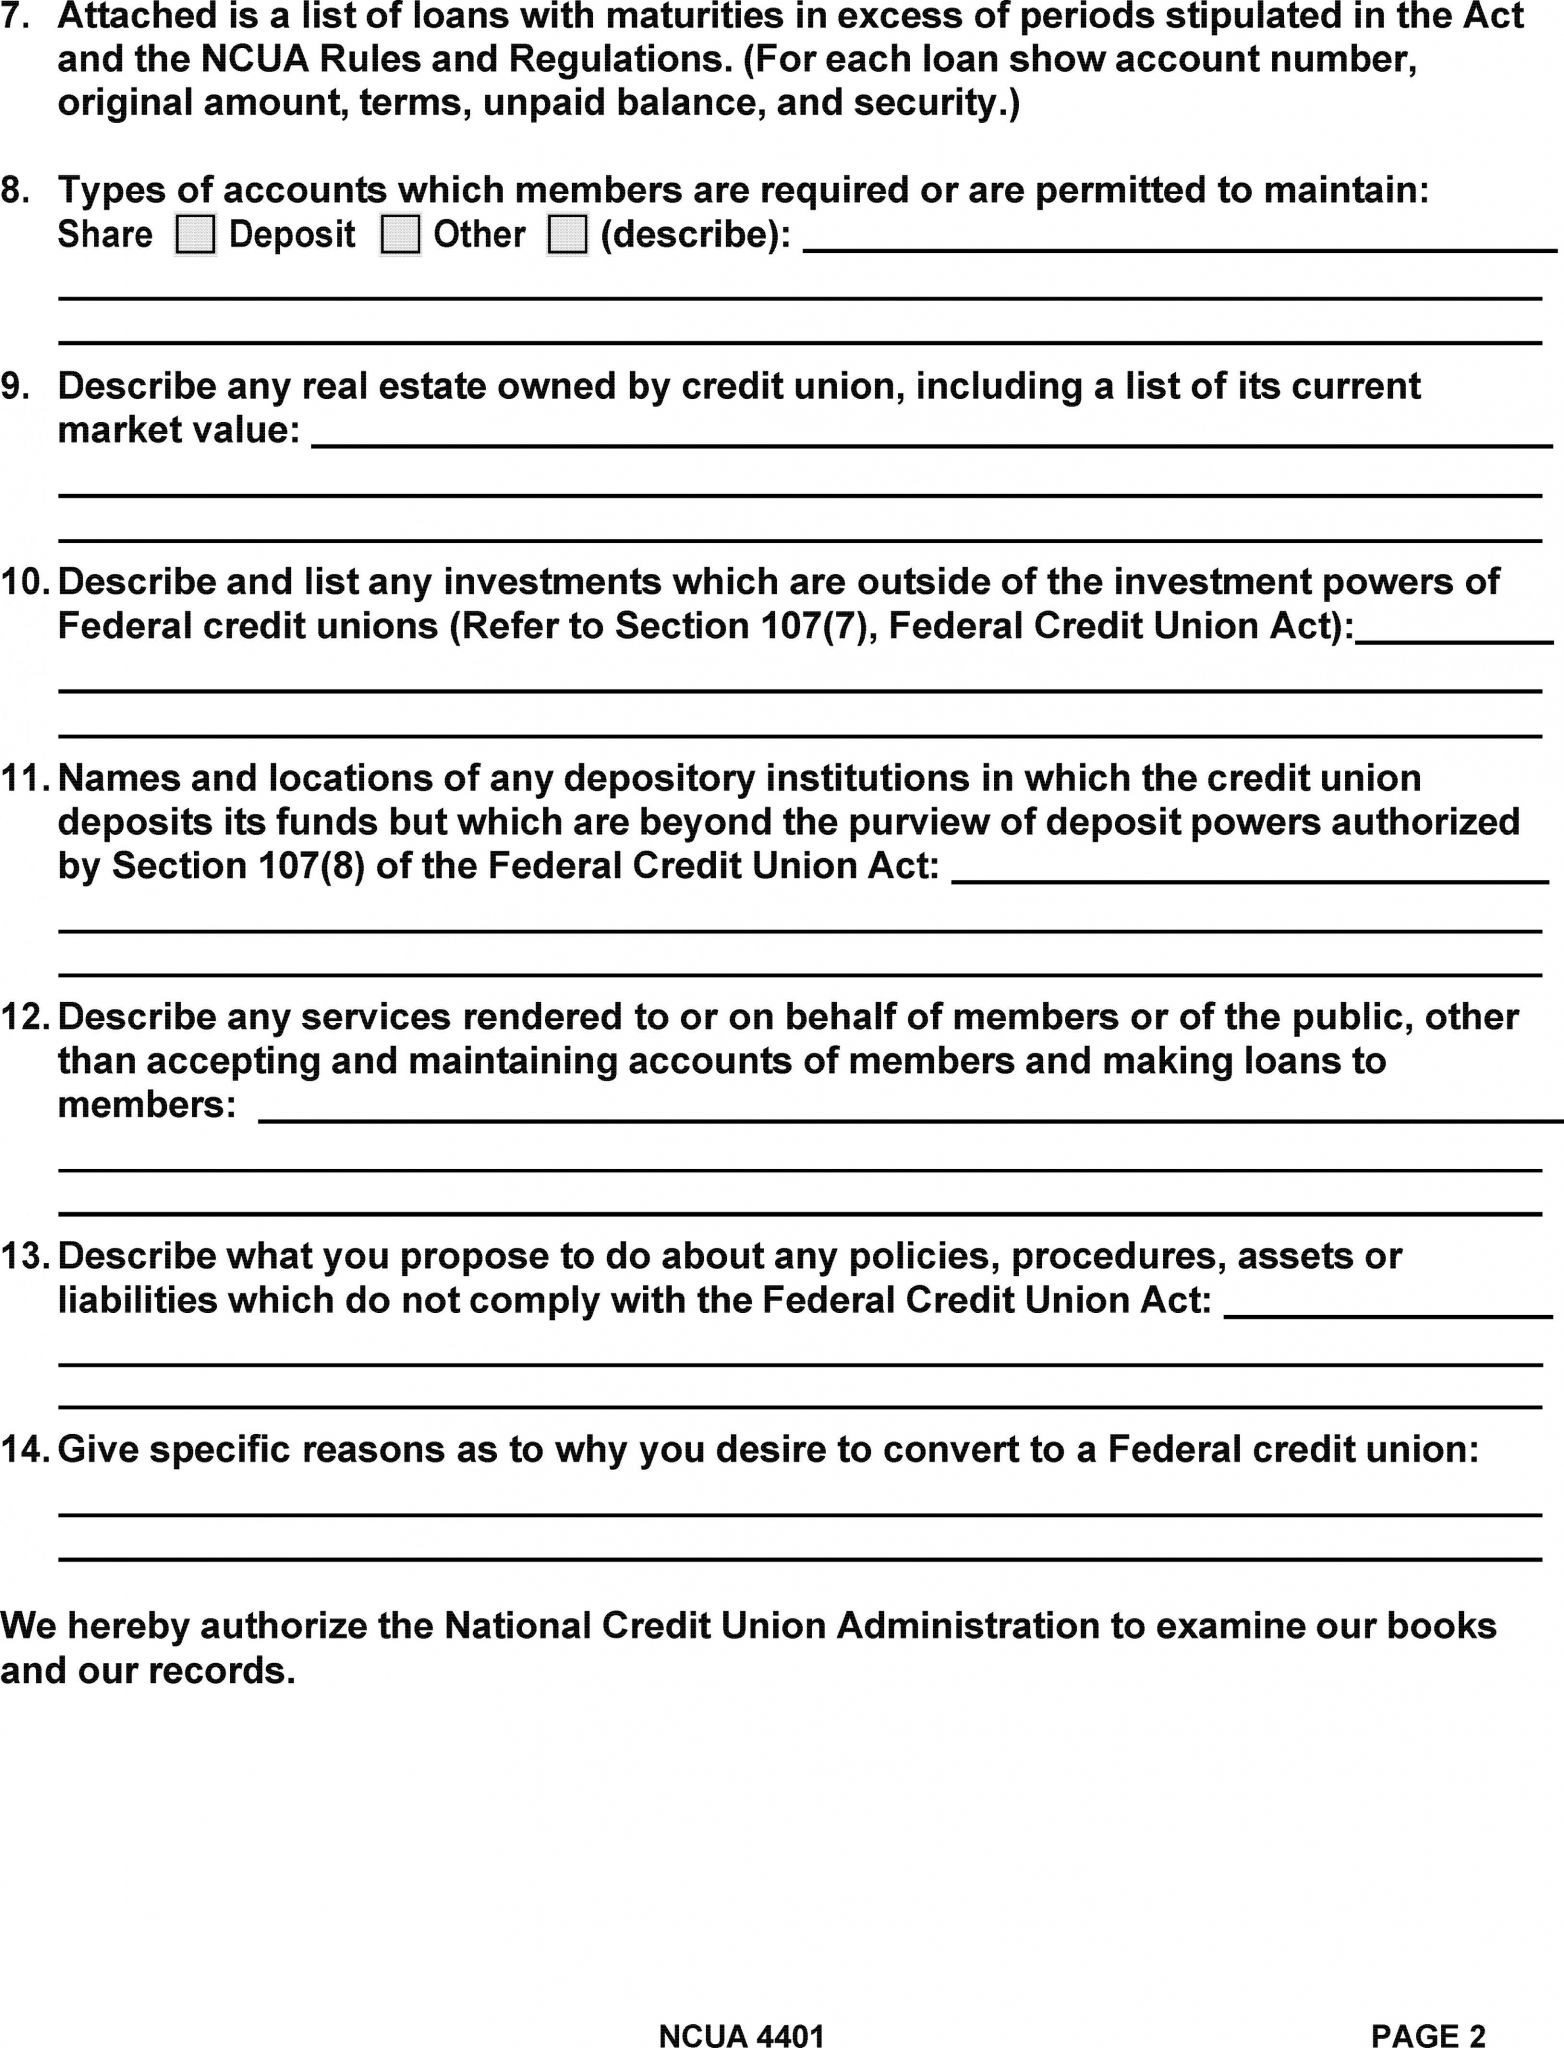 The Us Constitution Worksheet Answers 35 Constitutional Principles Worksheet Answers Worksheet